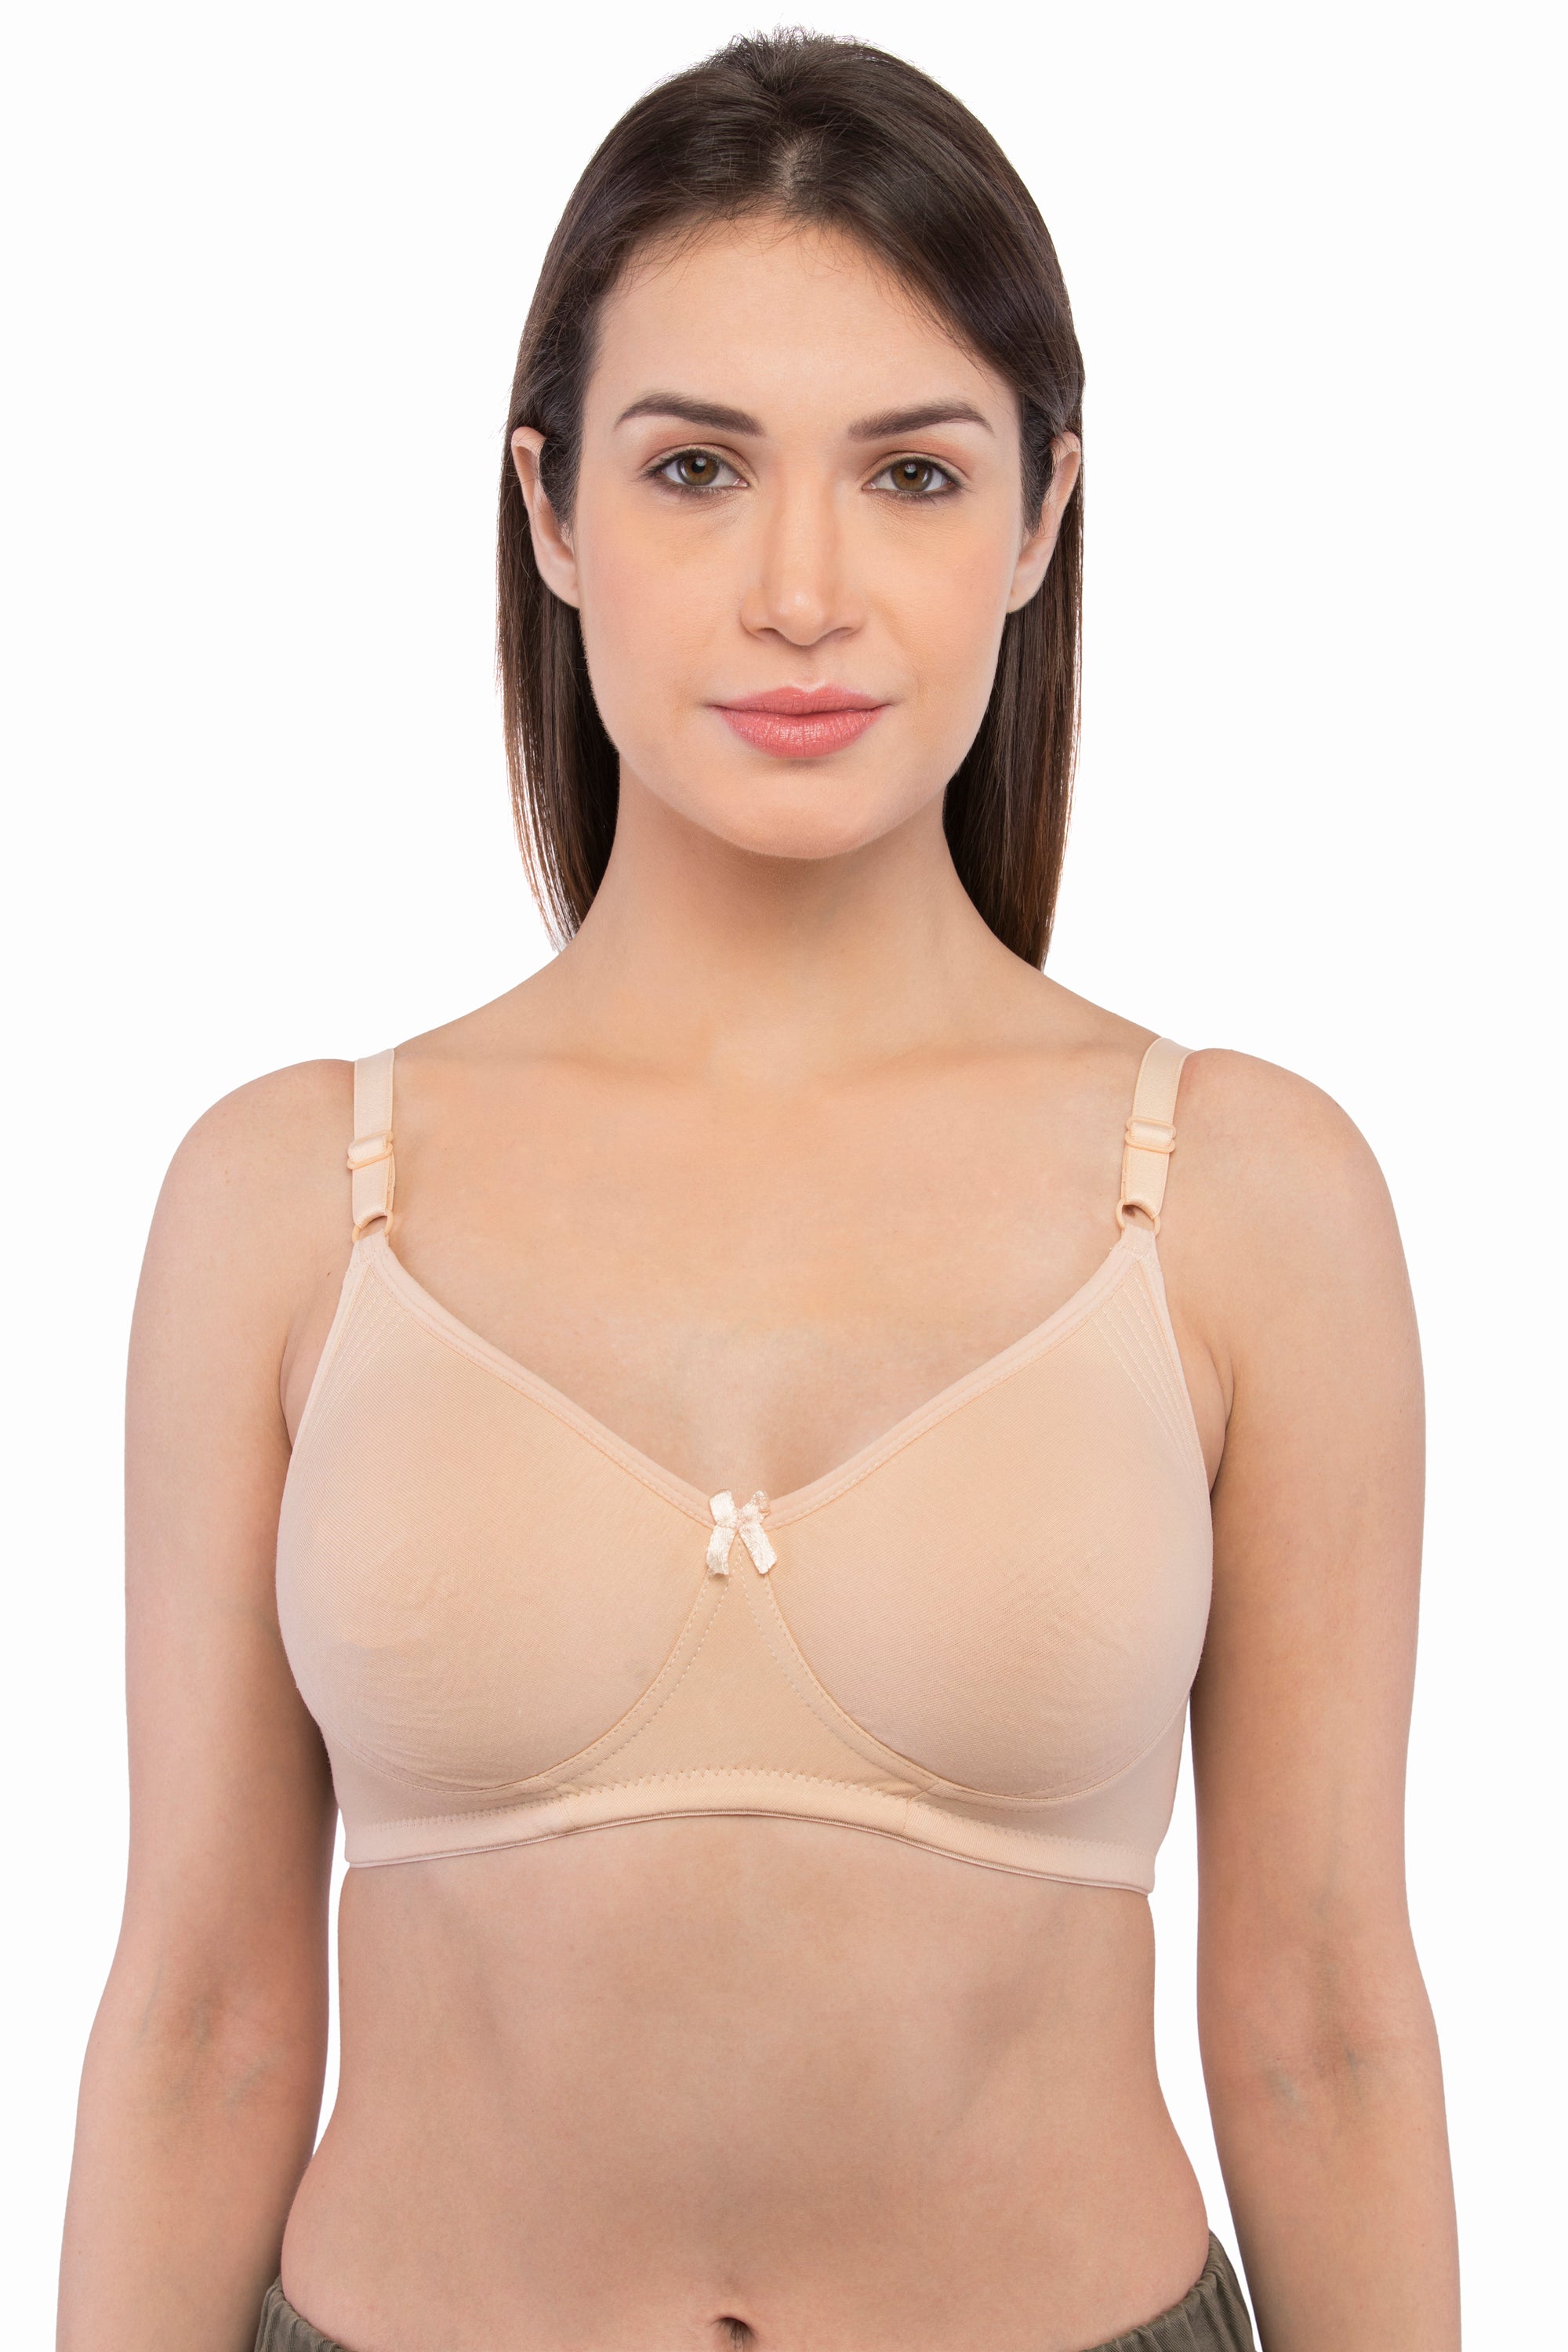 V.I.P. Brassiers Cosmet Double Layered Non Padded Wire-free Bridal